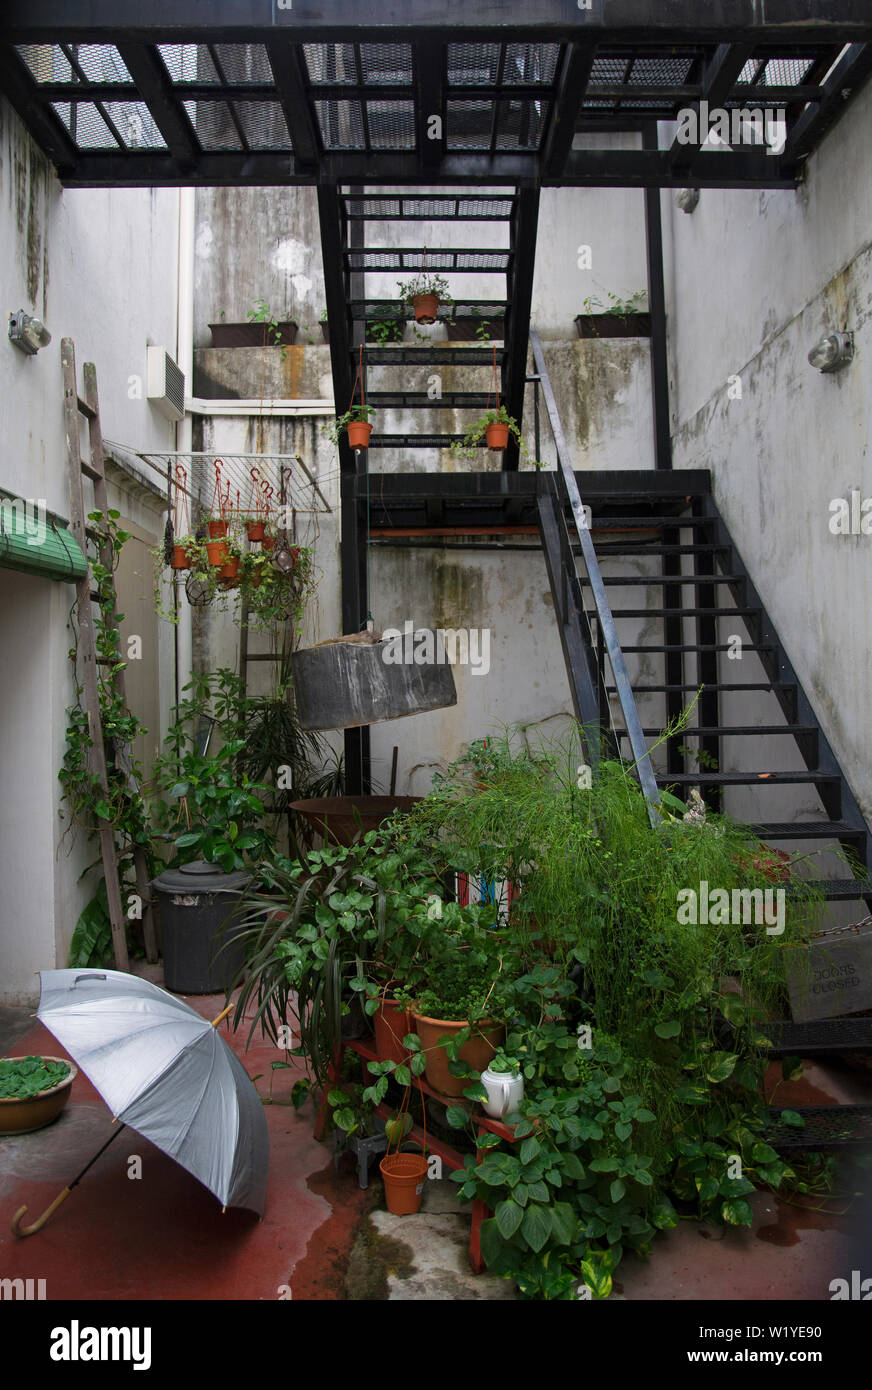 george town, penang/malaysia - february 23, 2017: idyllic garden backyard / patio of a cafe on lebuh penang with stairs Stock Photo